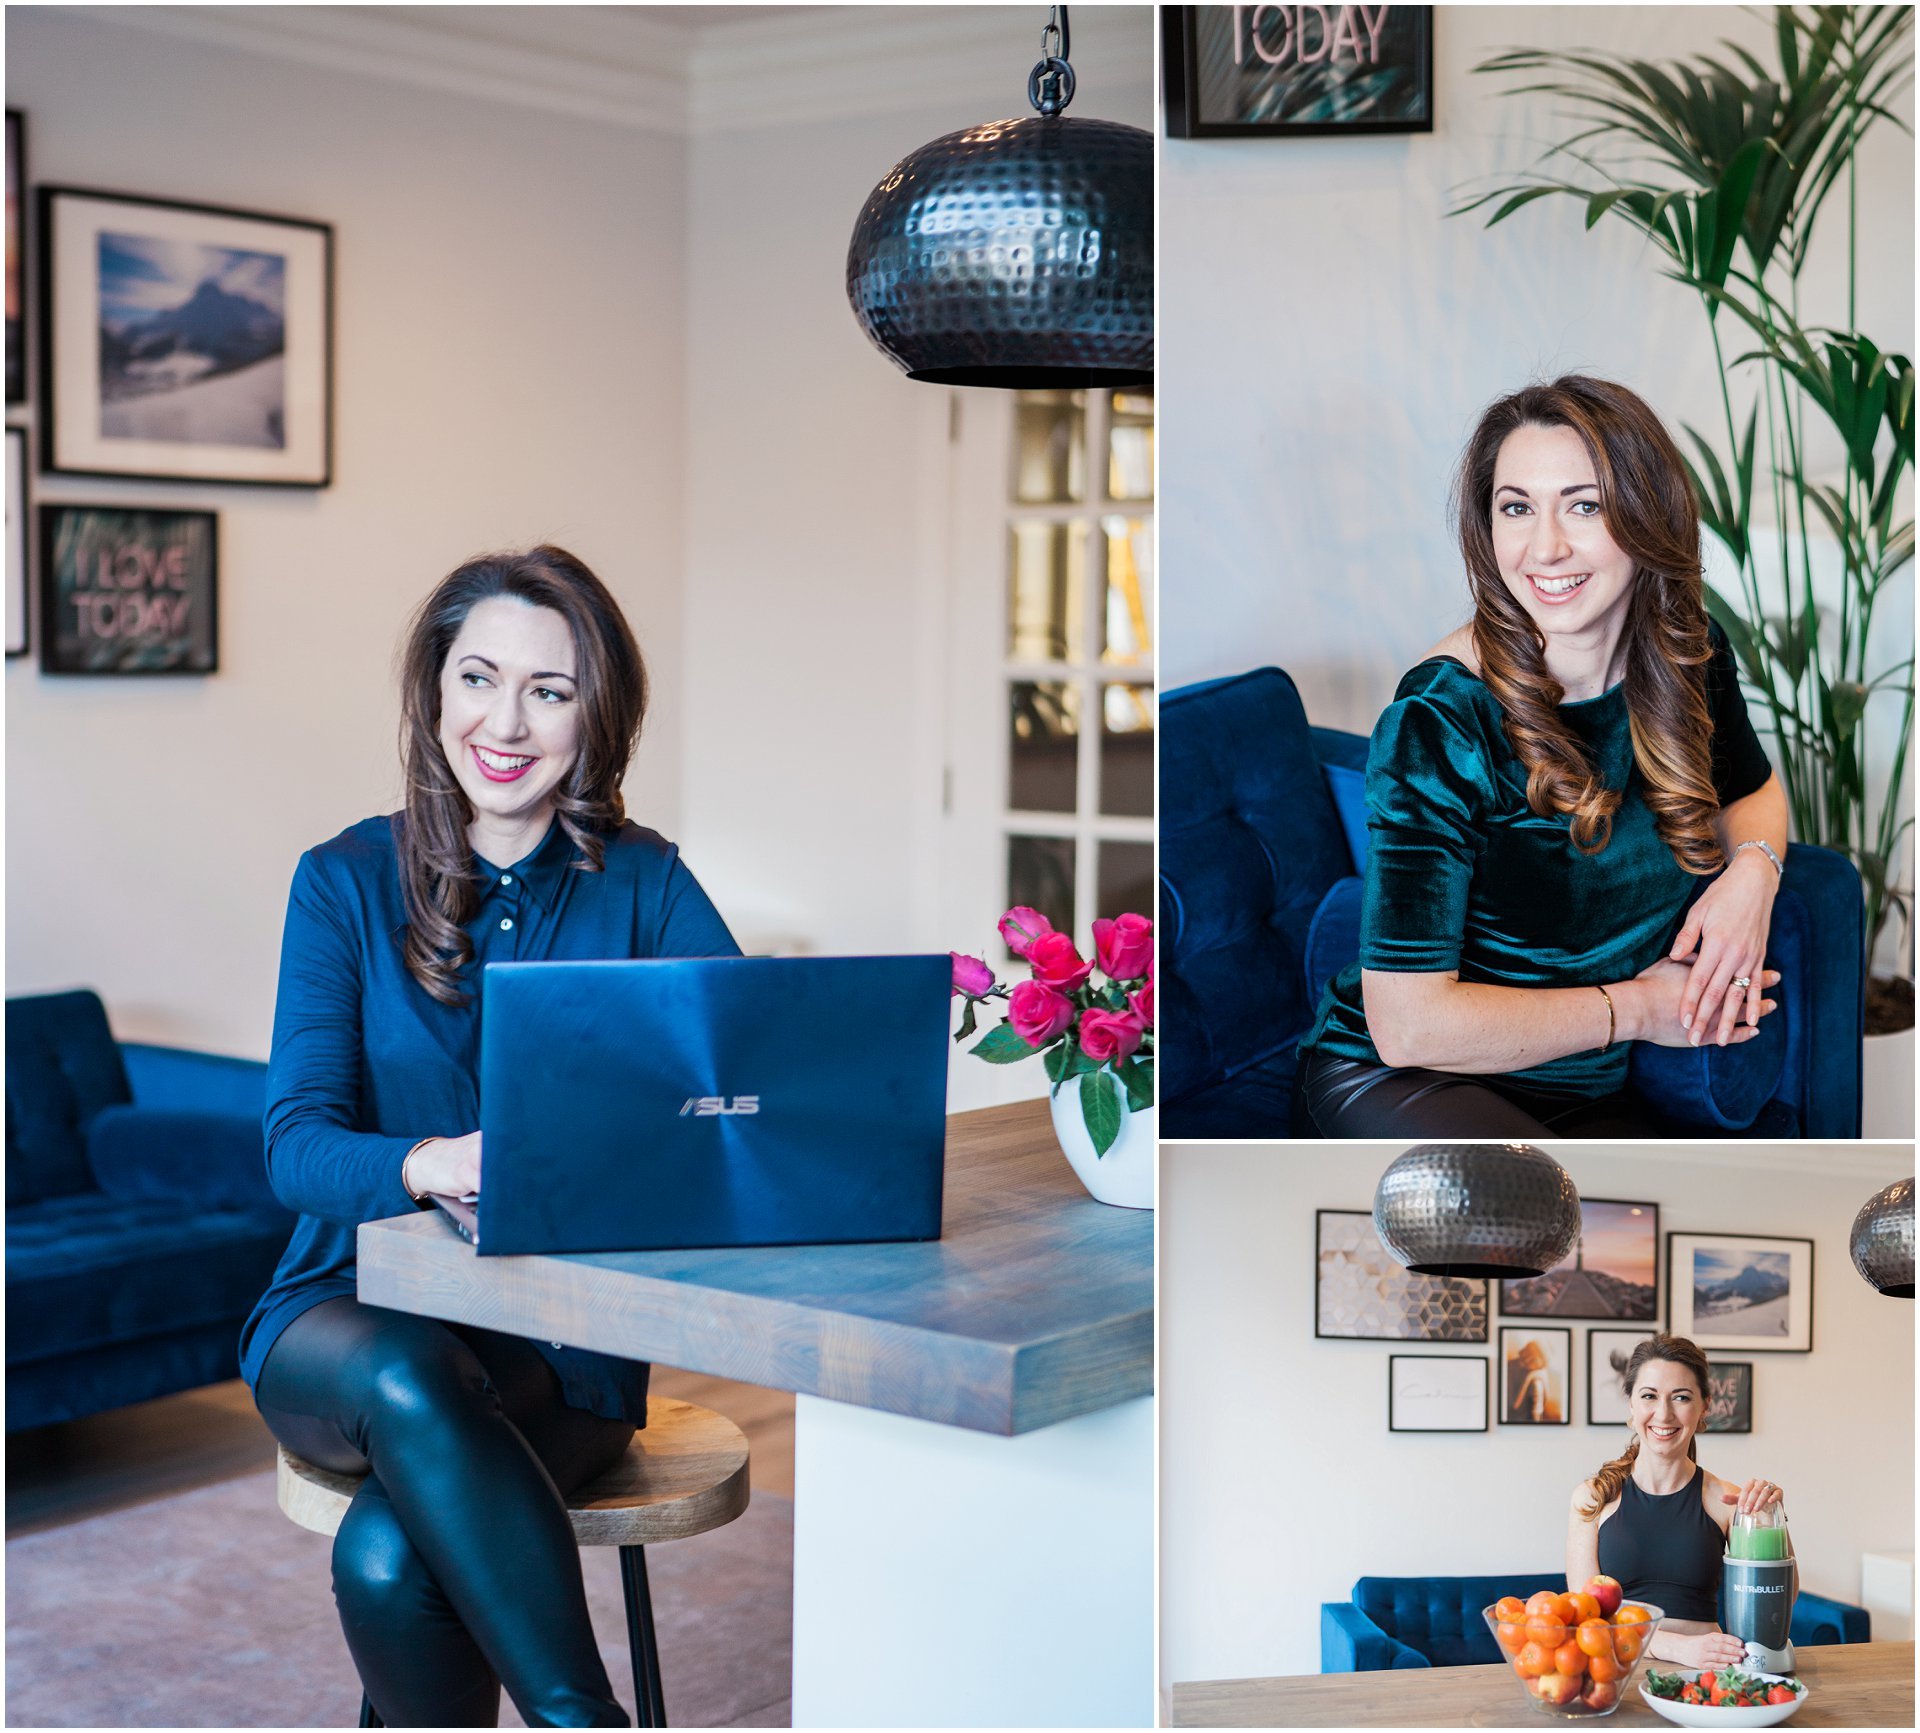 At home brand shoot with fertility expert Alexandra Ballerini from Birthsure. Images by London brand photographer AKP Branding Stories